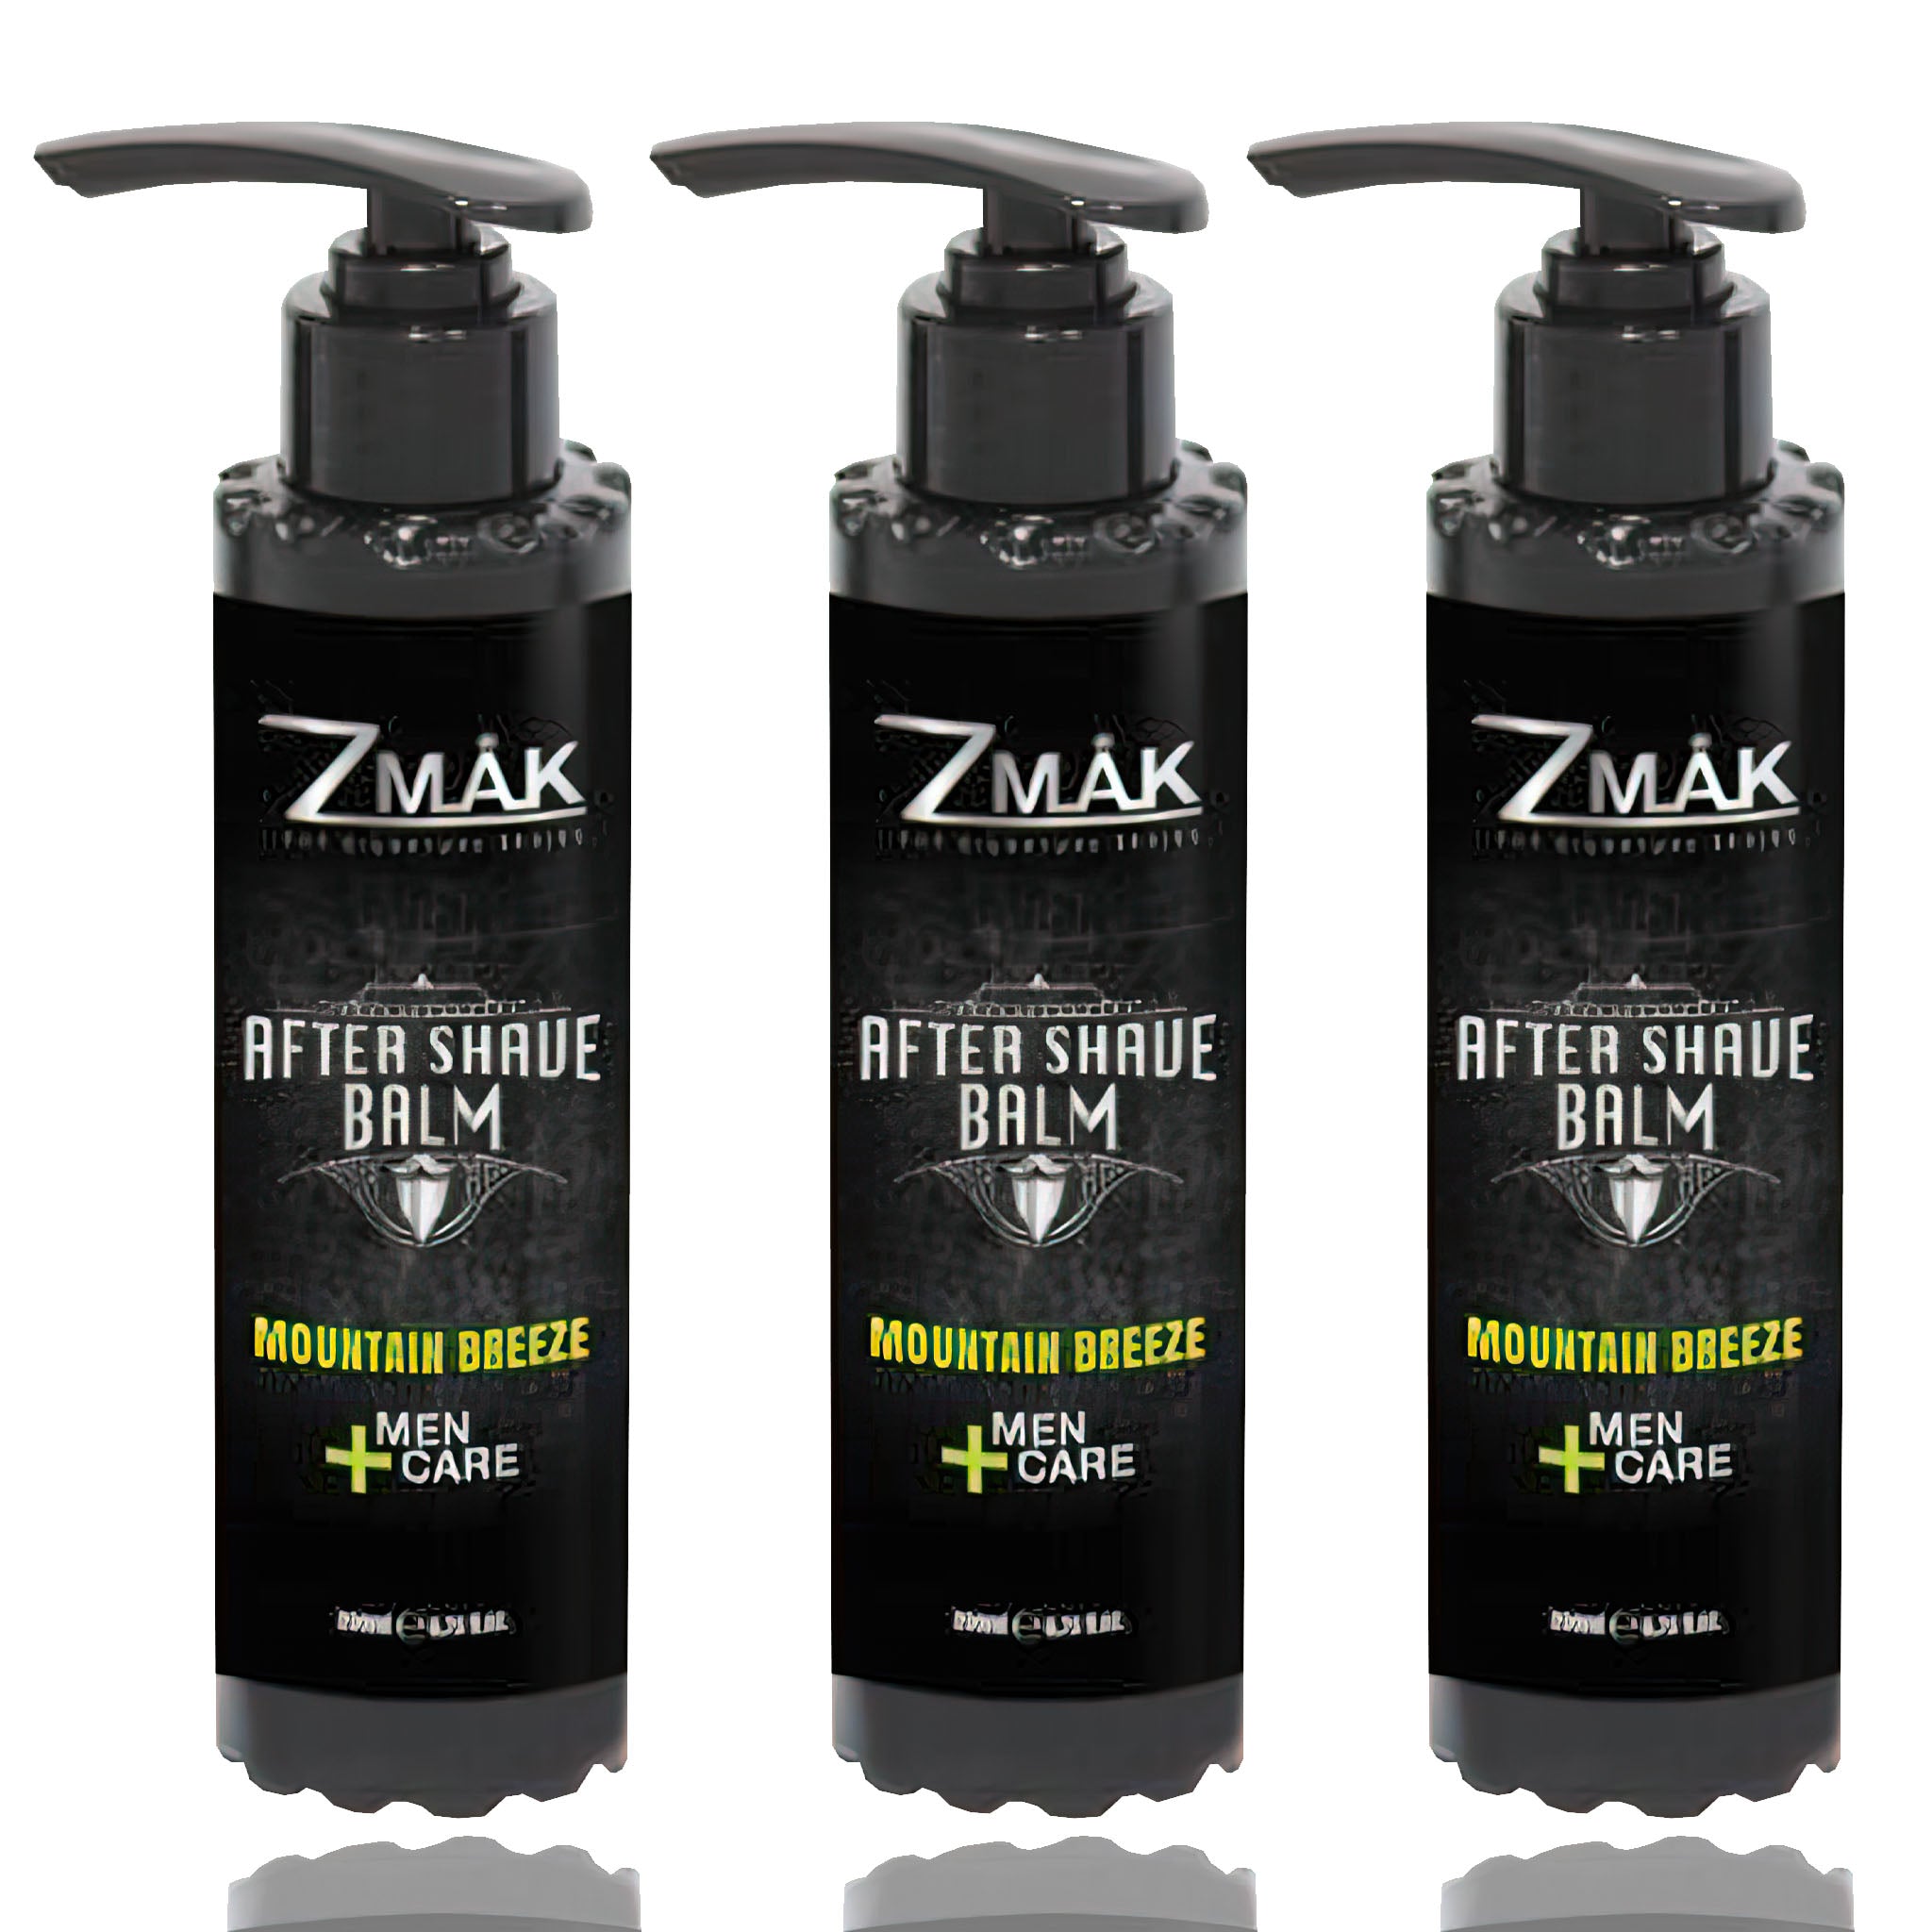 After Shave Balm for Men - Lasts Up to 8 Hours - Reduces Signs of Aging - Clinically Tested for Sensitive Skin - 3 Pack of Mountain Breeze - 6.75 fl oz. - ZMAK The Signature Series